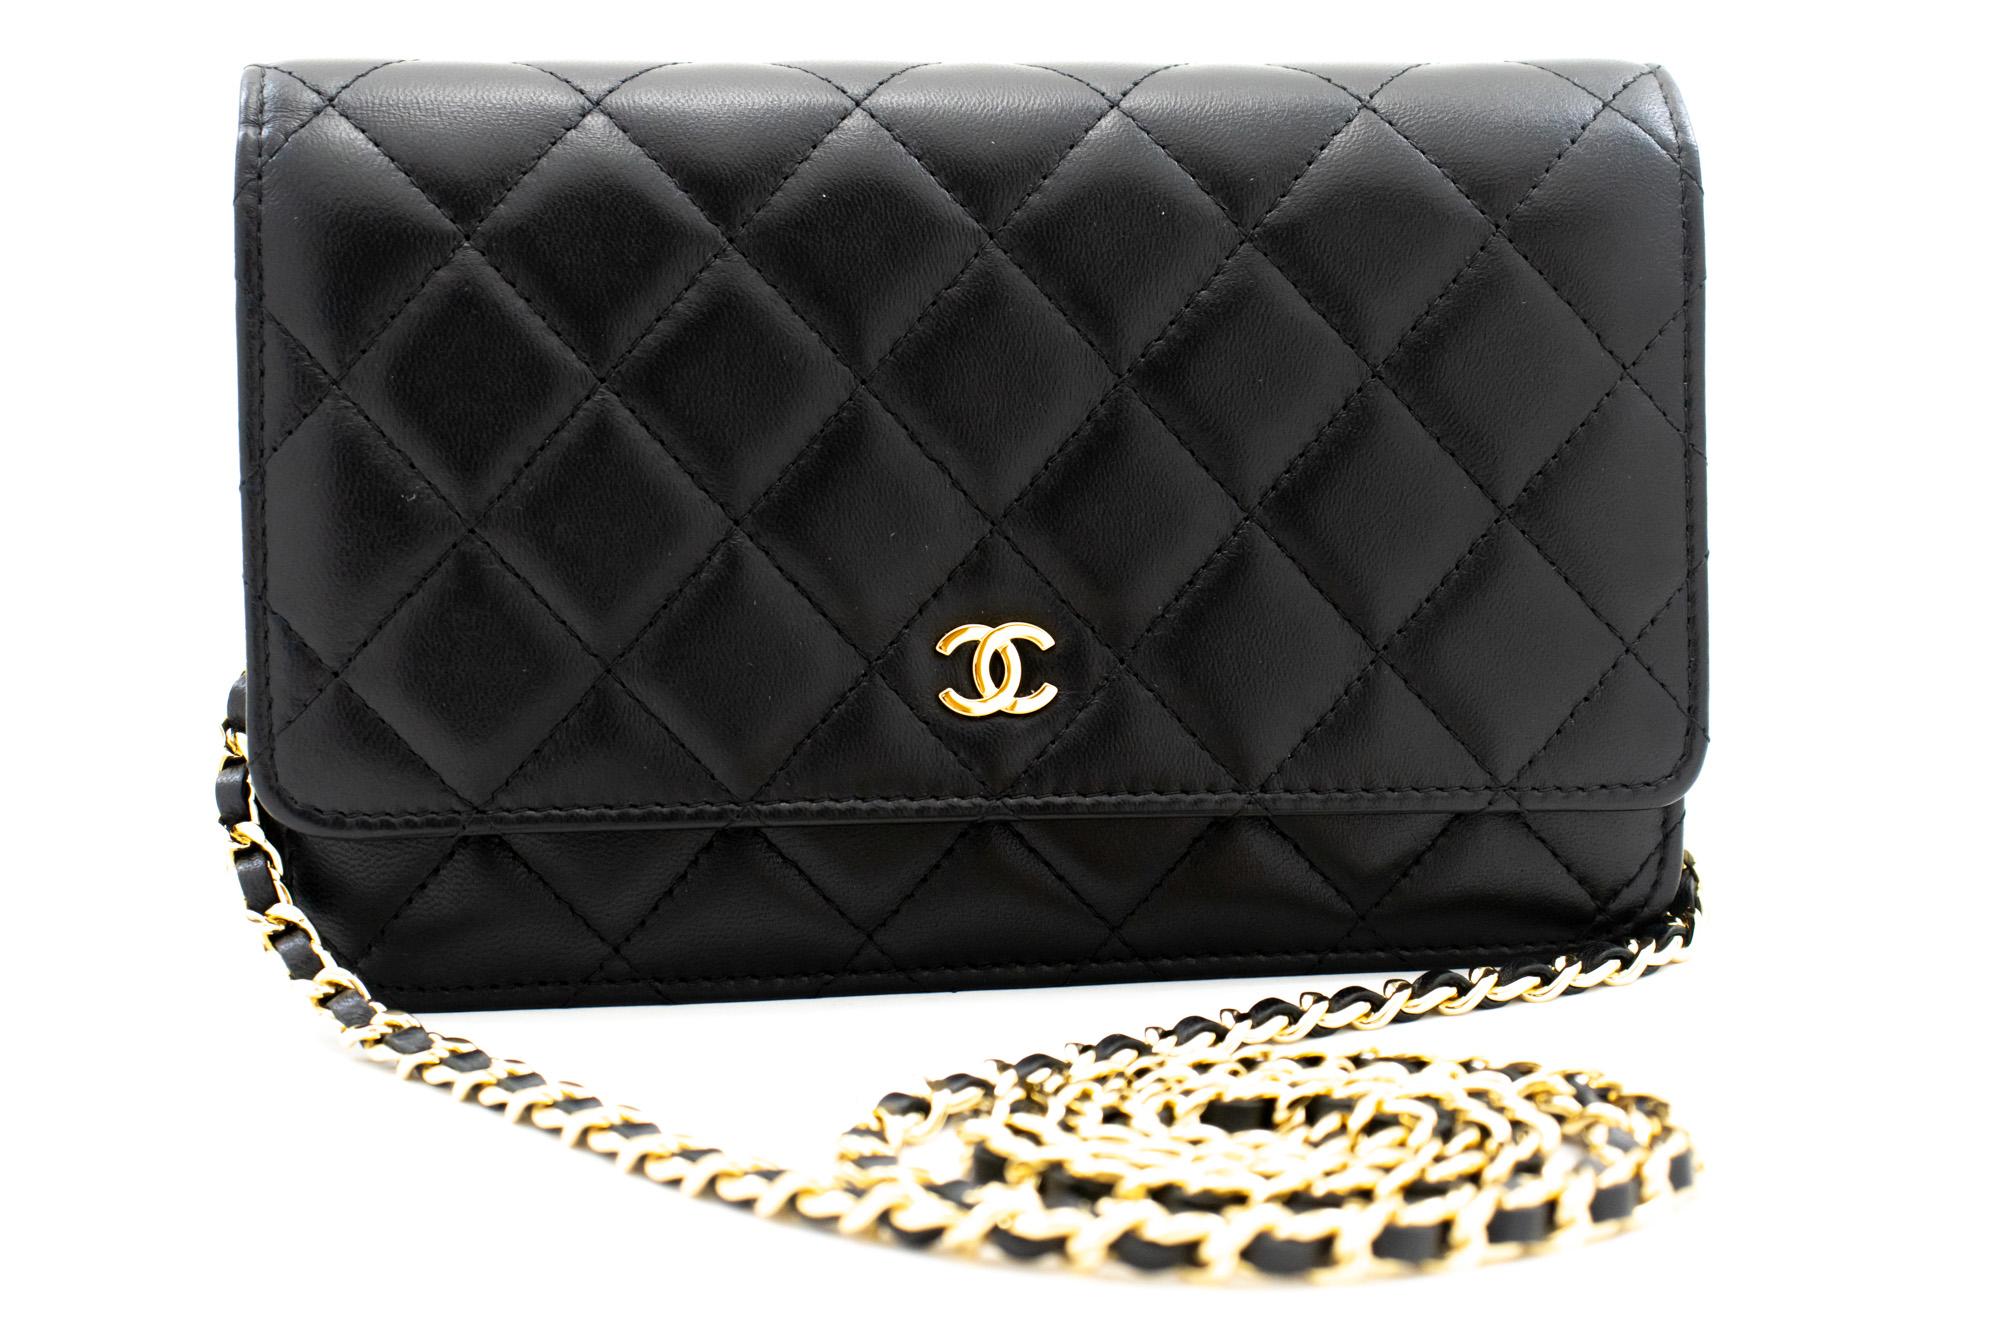 An authentic CHANEL Black Classic Wallet On Chain WOC Shoulder Bag made of black Lambskin. The color is Black. The outside material is Leather. The pattern is Solid. This item is Contemporary. The year of manufacture would be 2017.
Conditions &